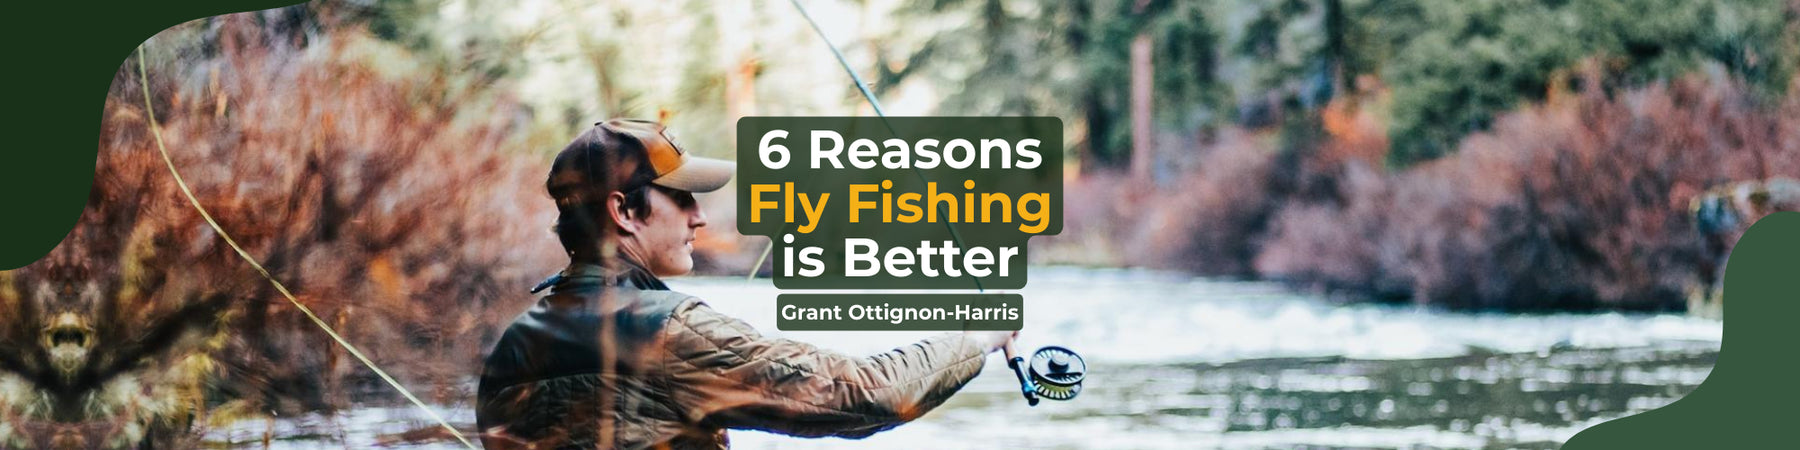 Header image for 6 reasons fly fishing is better showing a young man in a river casting his fly rod